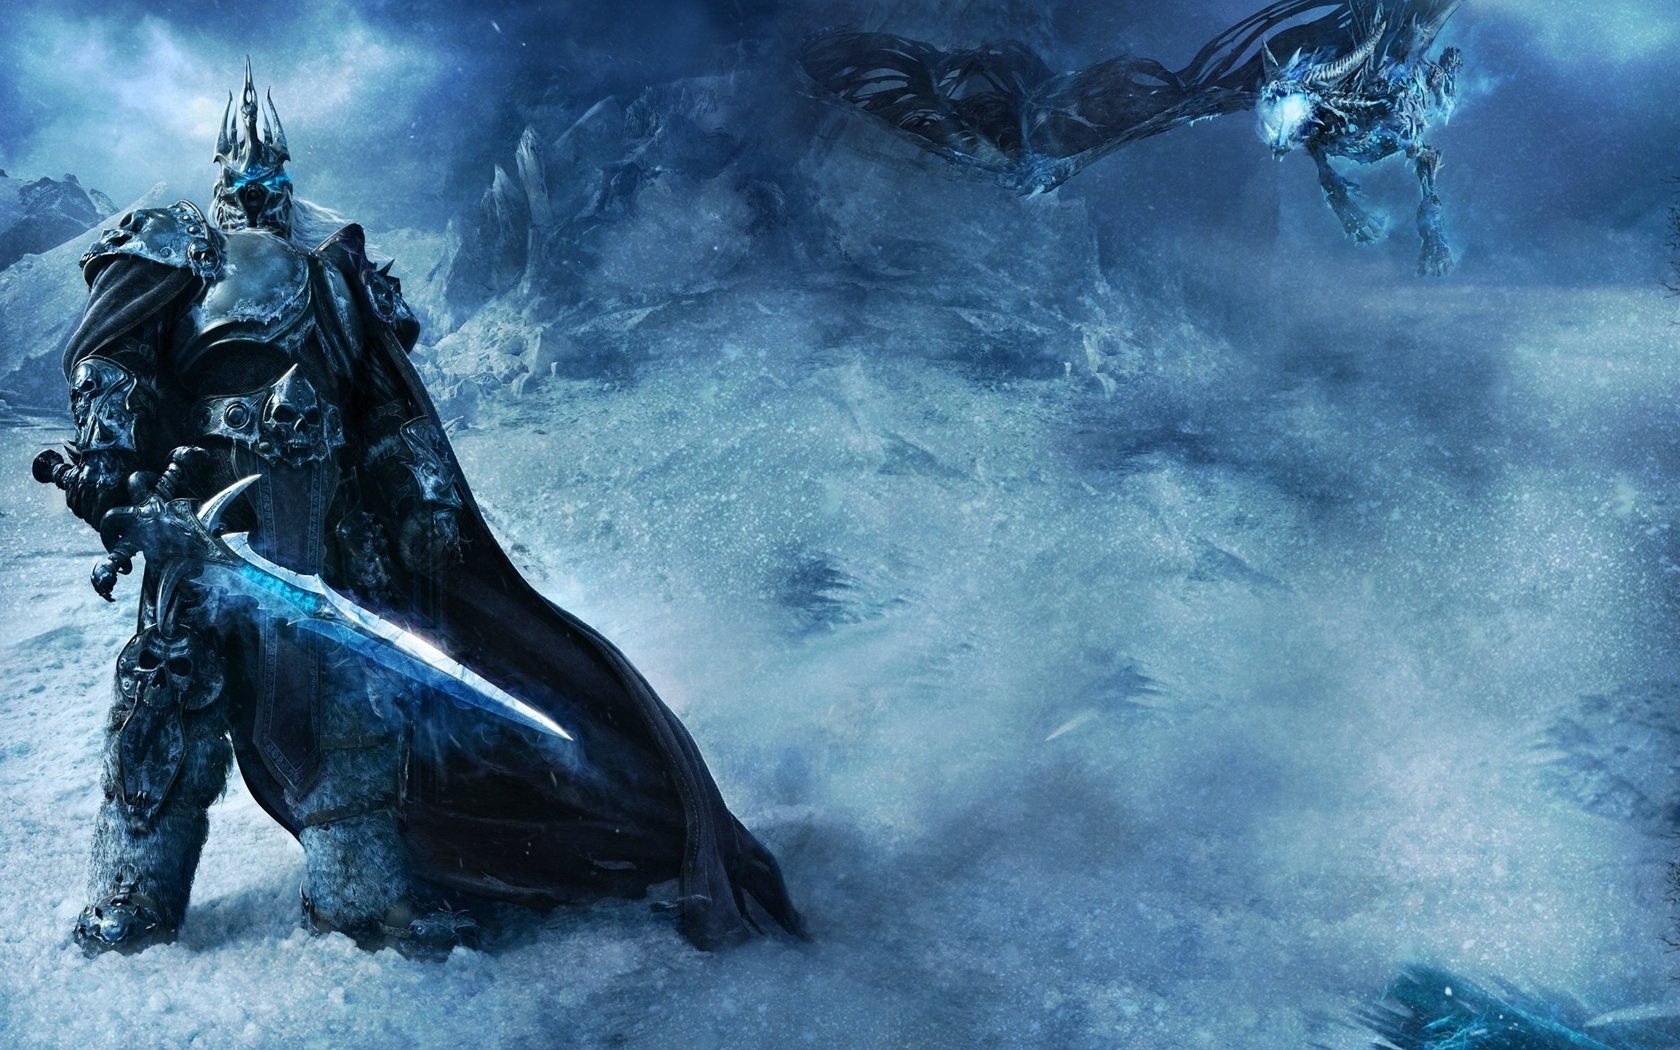 Wallpaper | 3D wallpapers | photo | picture | ice warrior, The sword